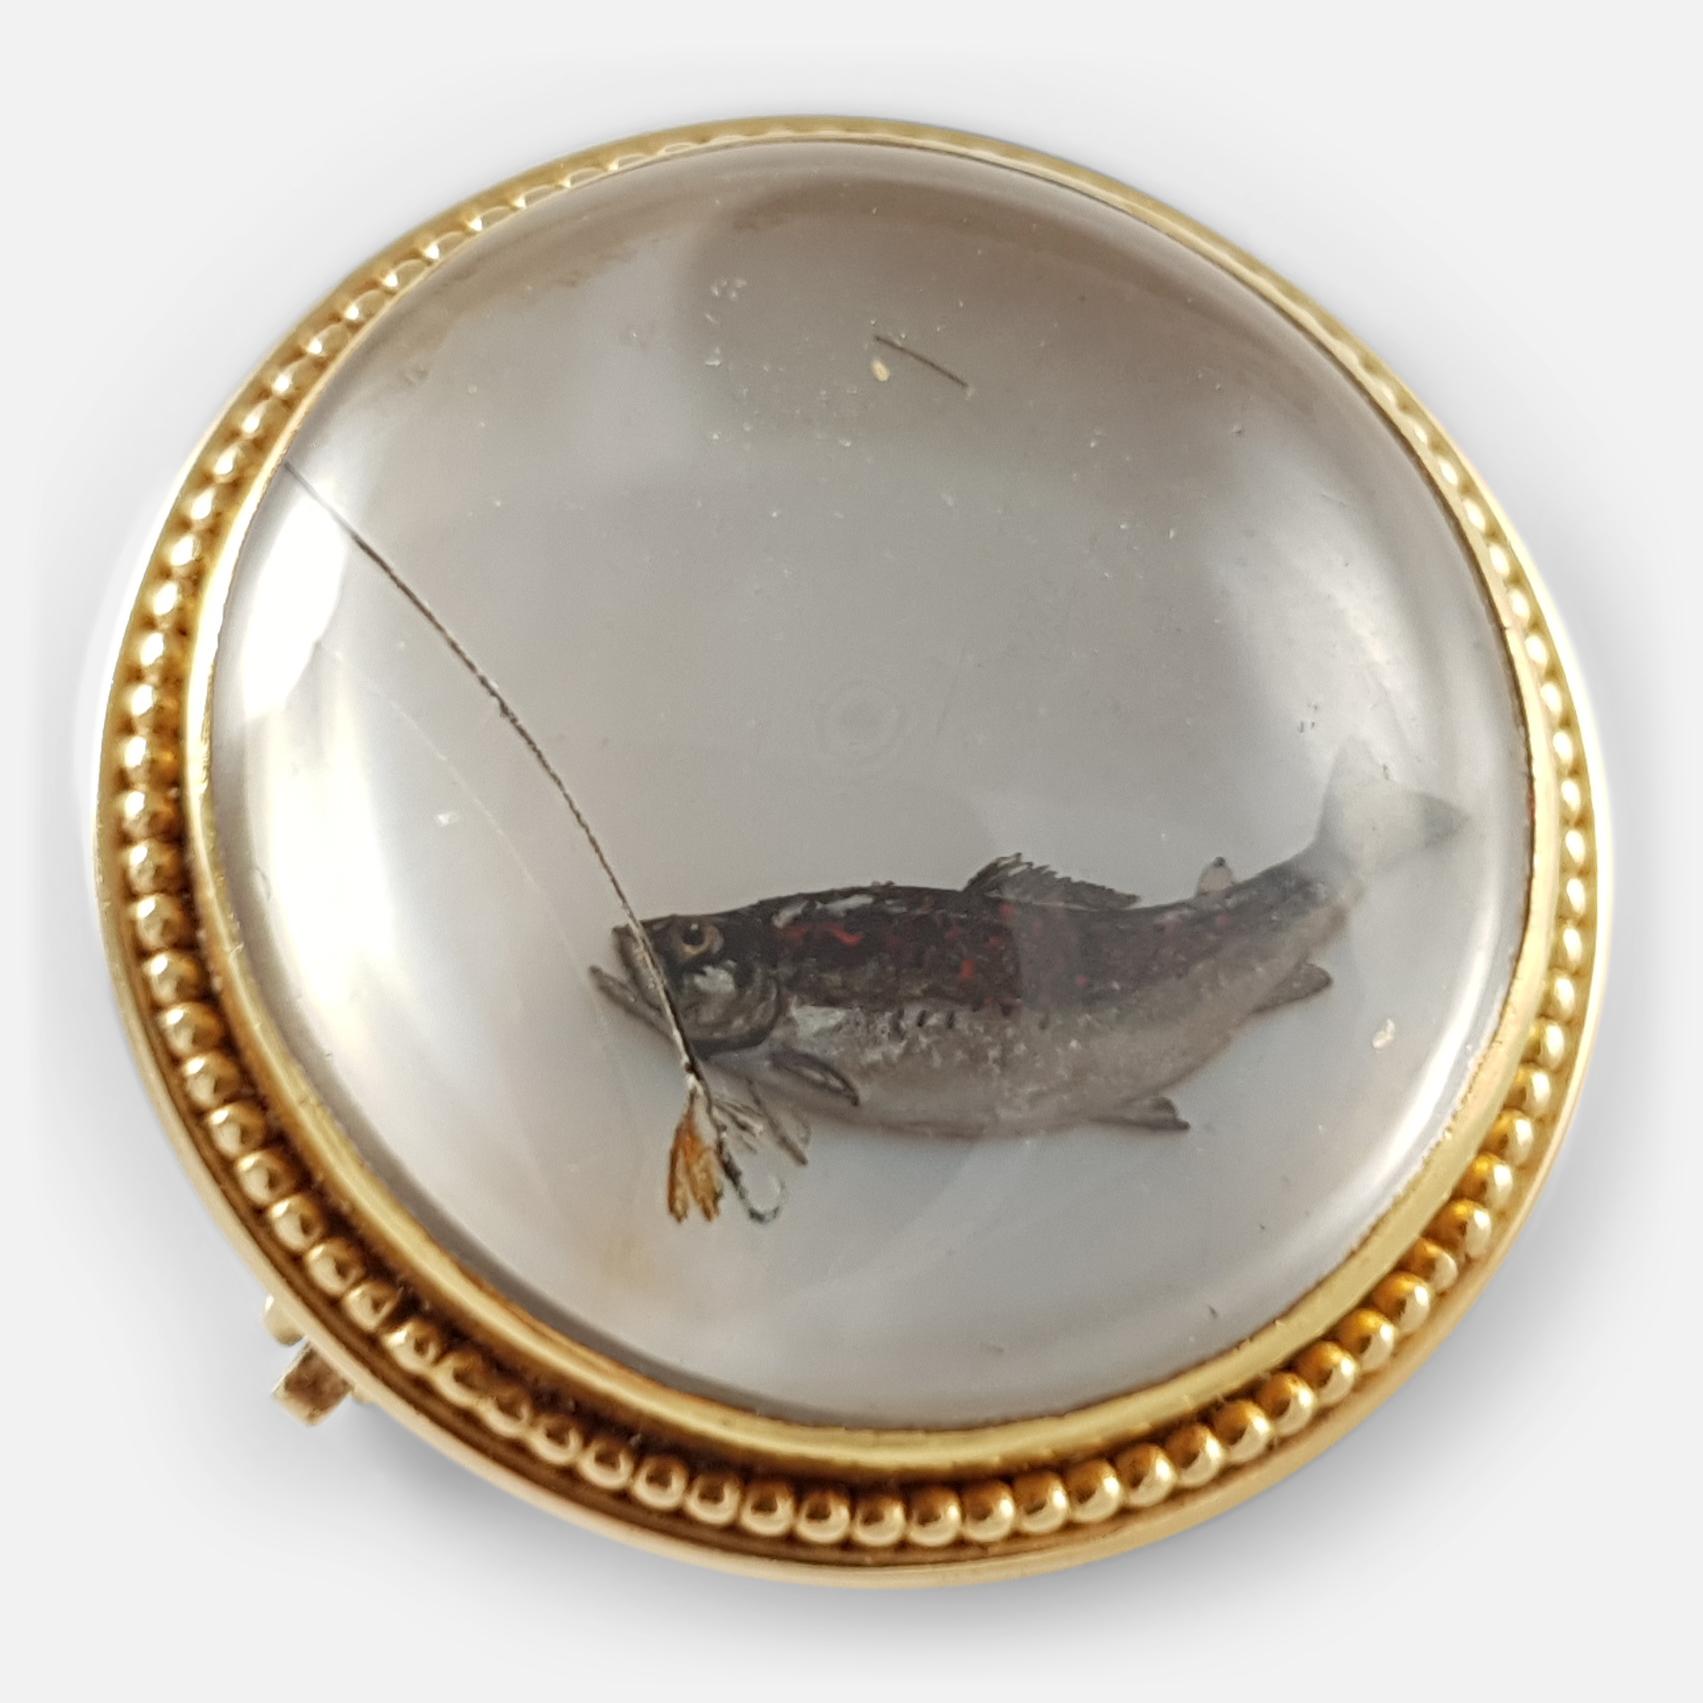 Description: - This is a beautiful early 20th century 14 karat yellow gold reverse-carved crystal intaglio fishing brooch. The reverse-carved crystal intaglio is crafted to depict a trout in the process of taking a fly on shell ground. The brooch is